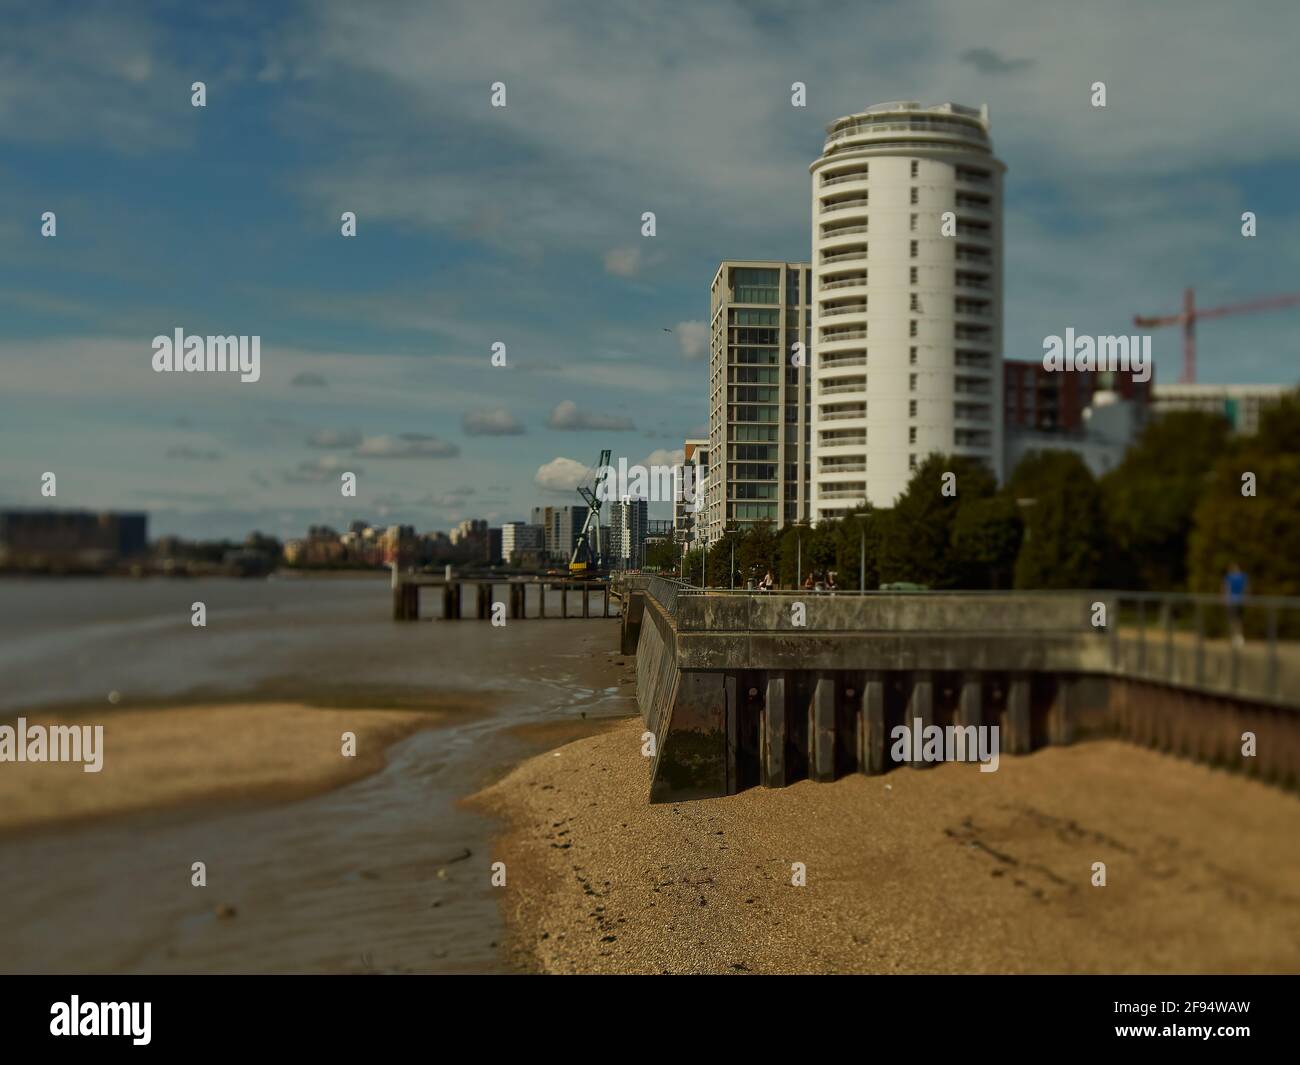 London Aug 2019 - Aspirational riverside residential properties near the Royal Victoria Dock, part of a gentrification and redevelopment project. Stock Photo